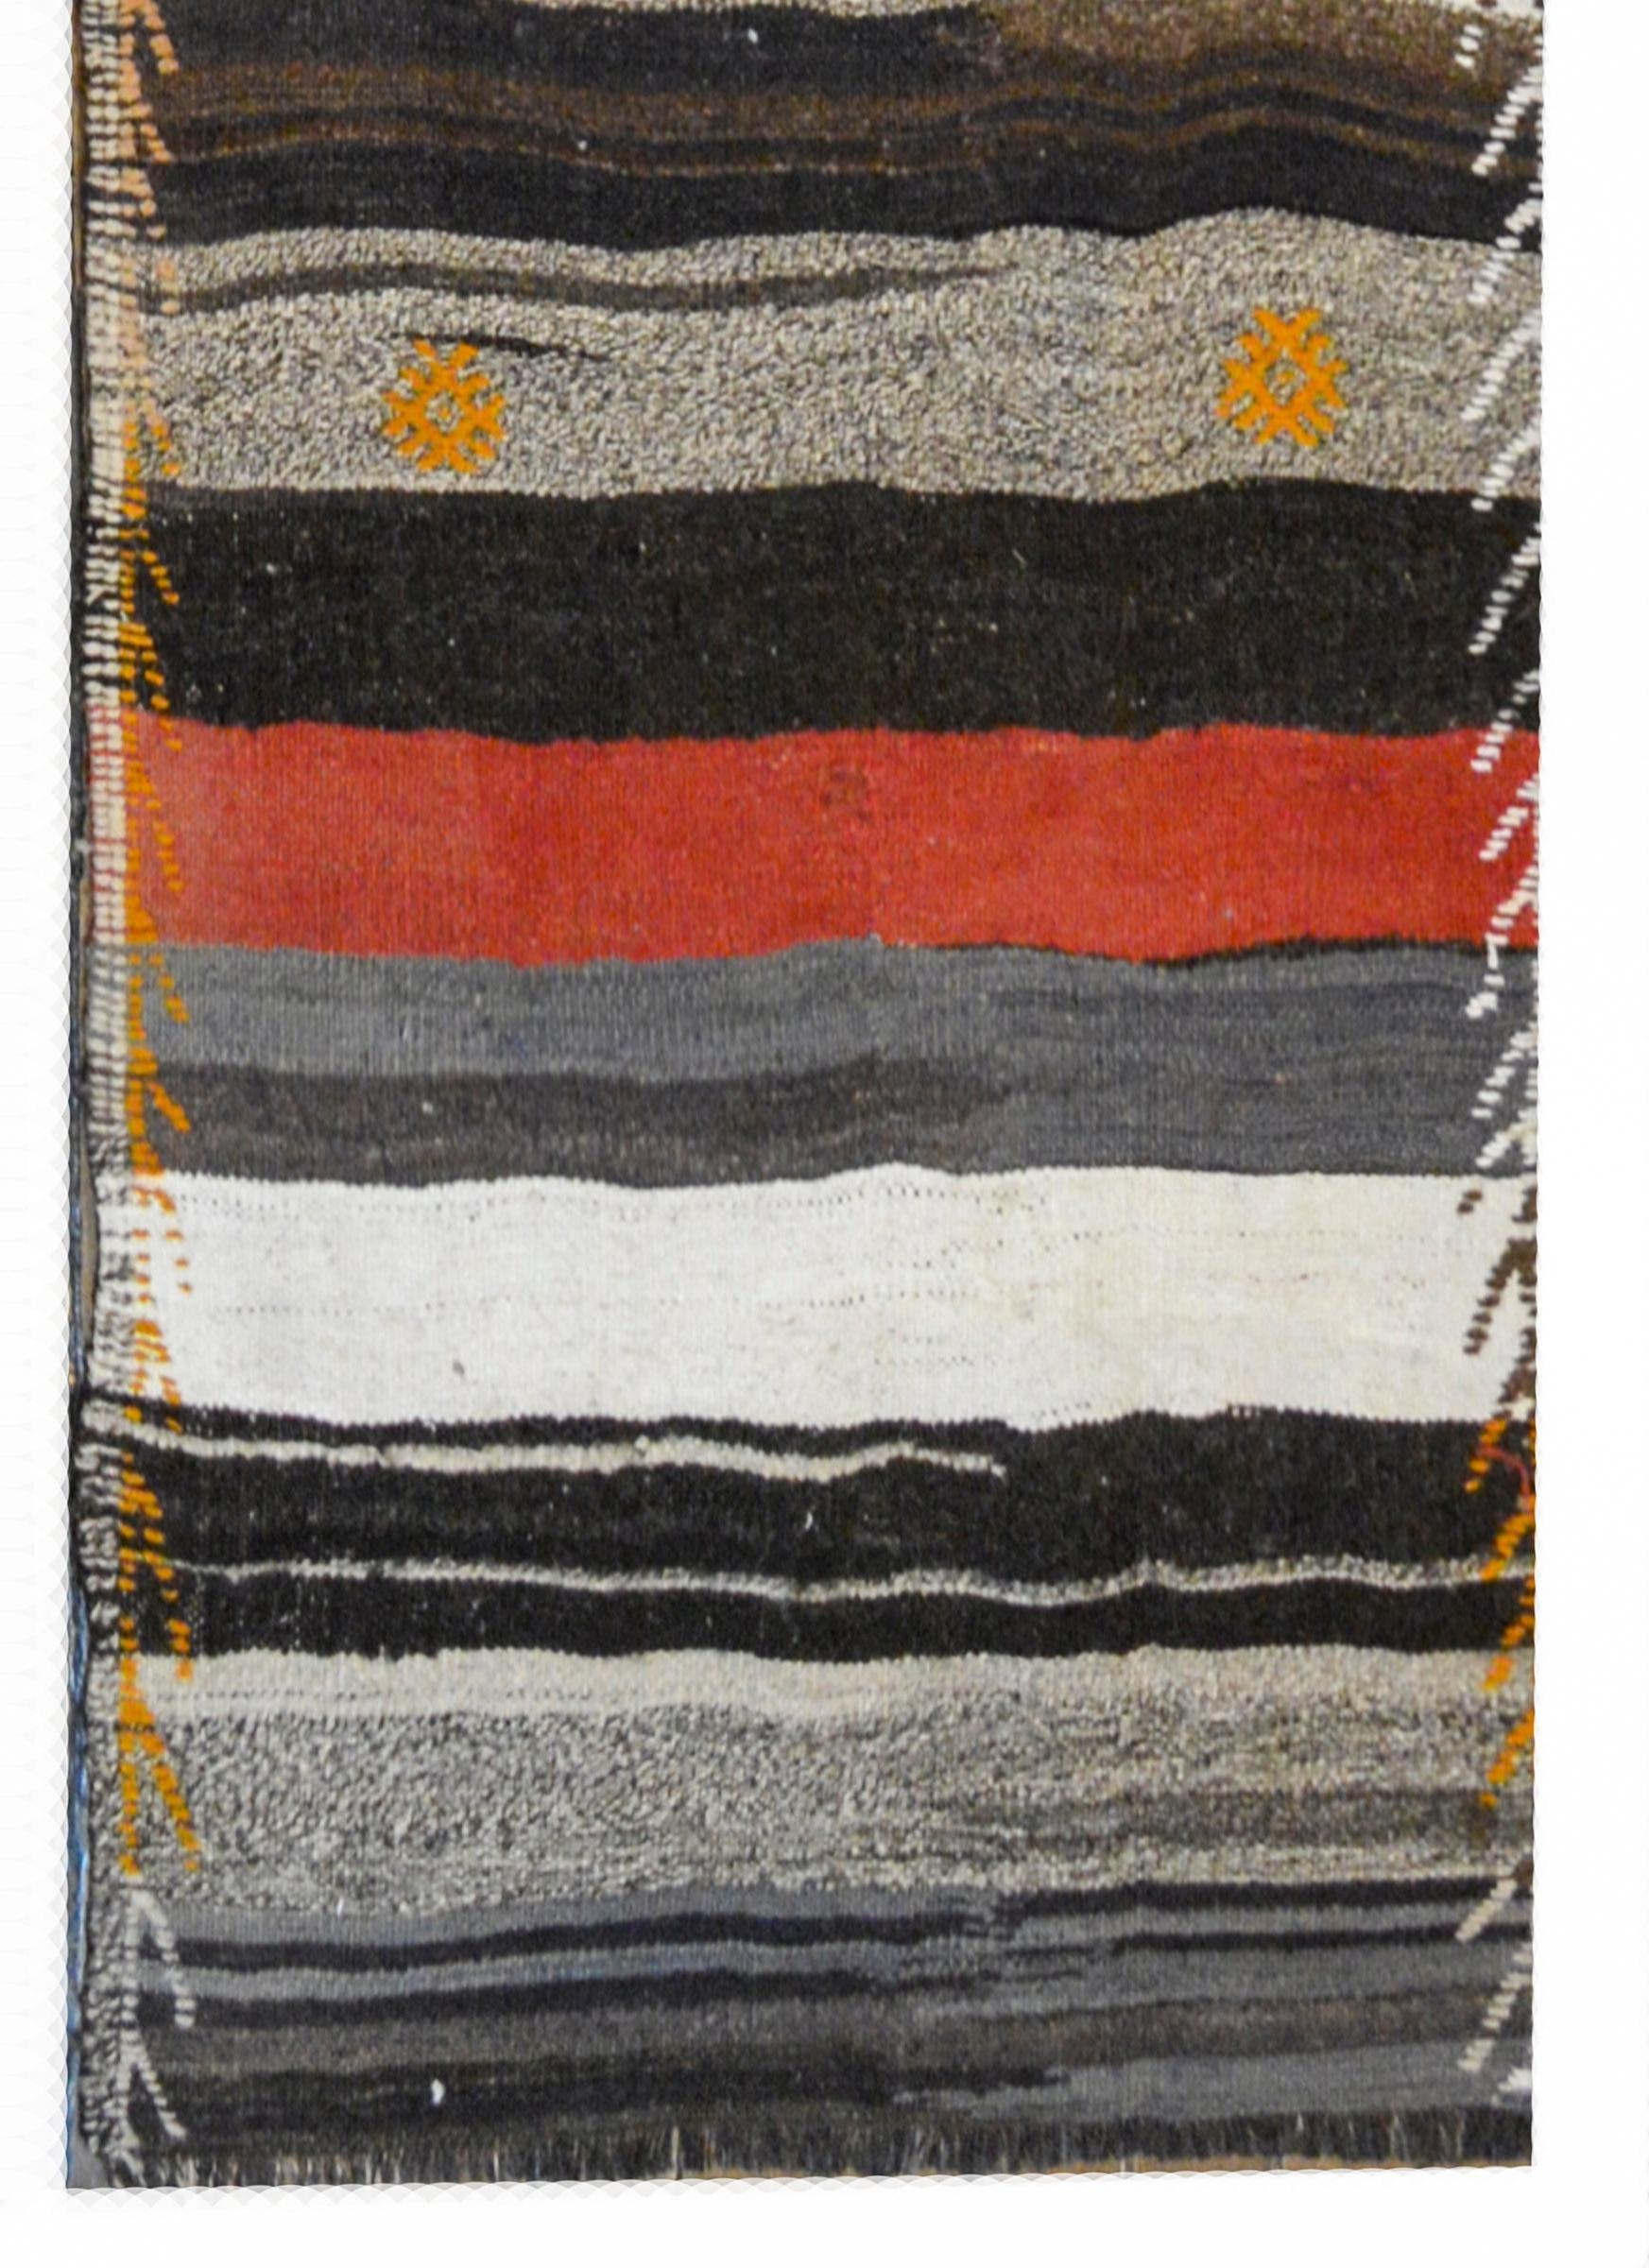 A fantastic mid-20th century Turkish Konya Kilim runner with alternating crimson, orange, black, white, and gray stripes with embroidered stylized flowers and an embroidered border.